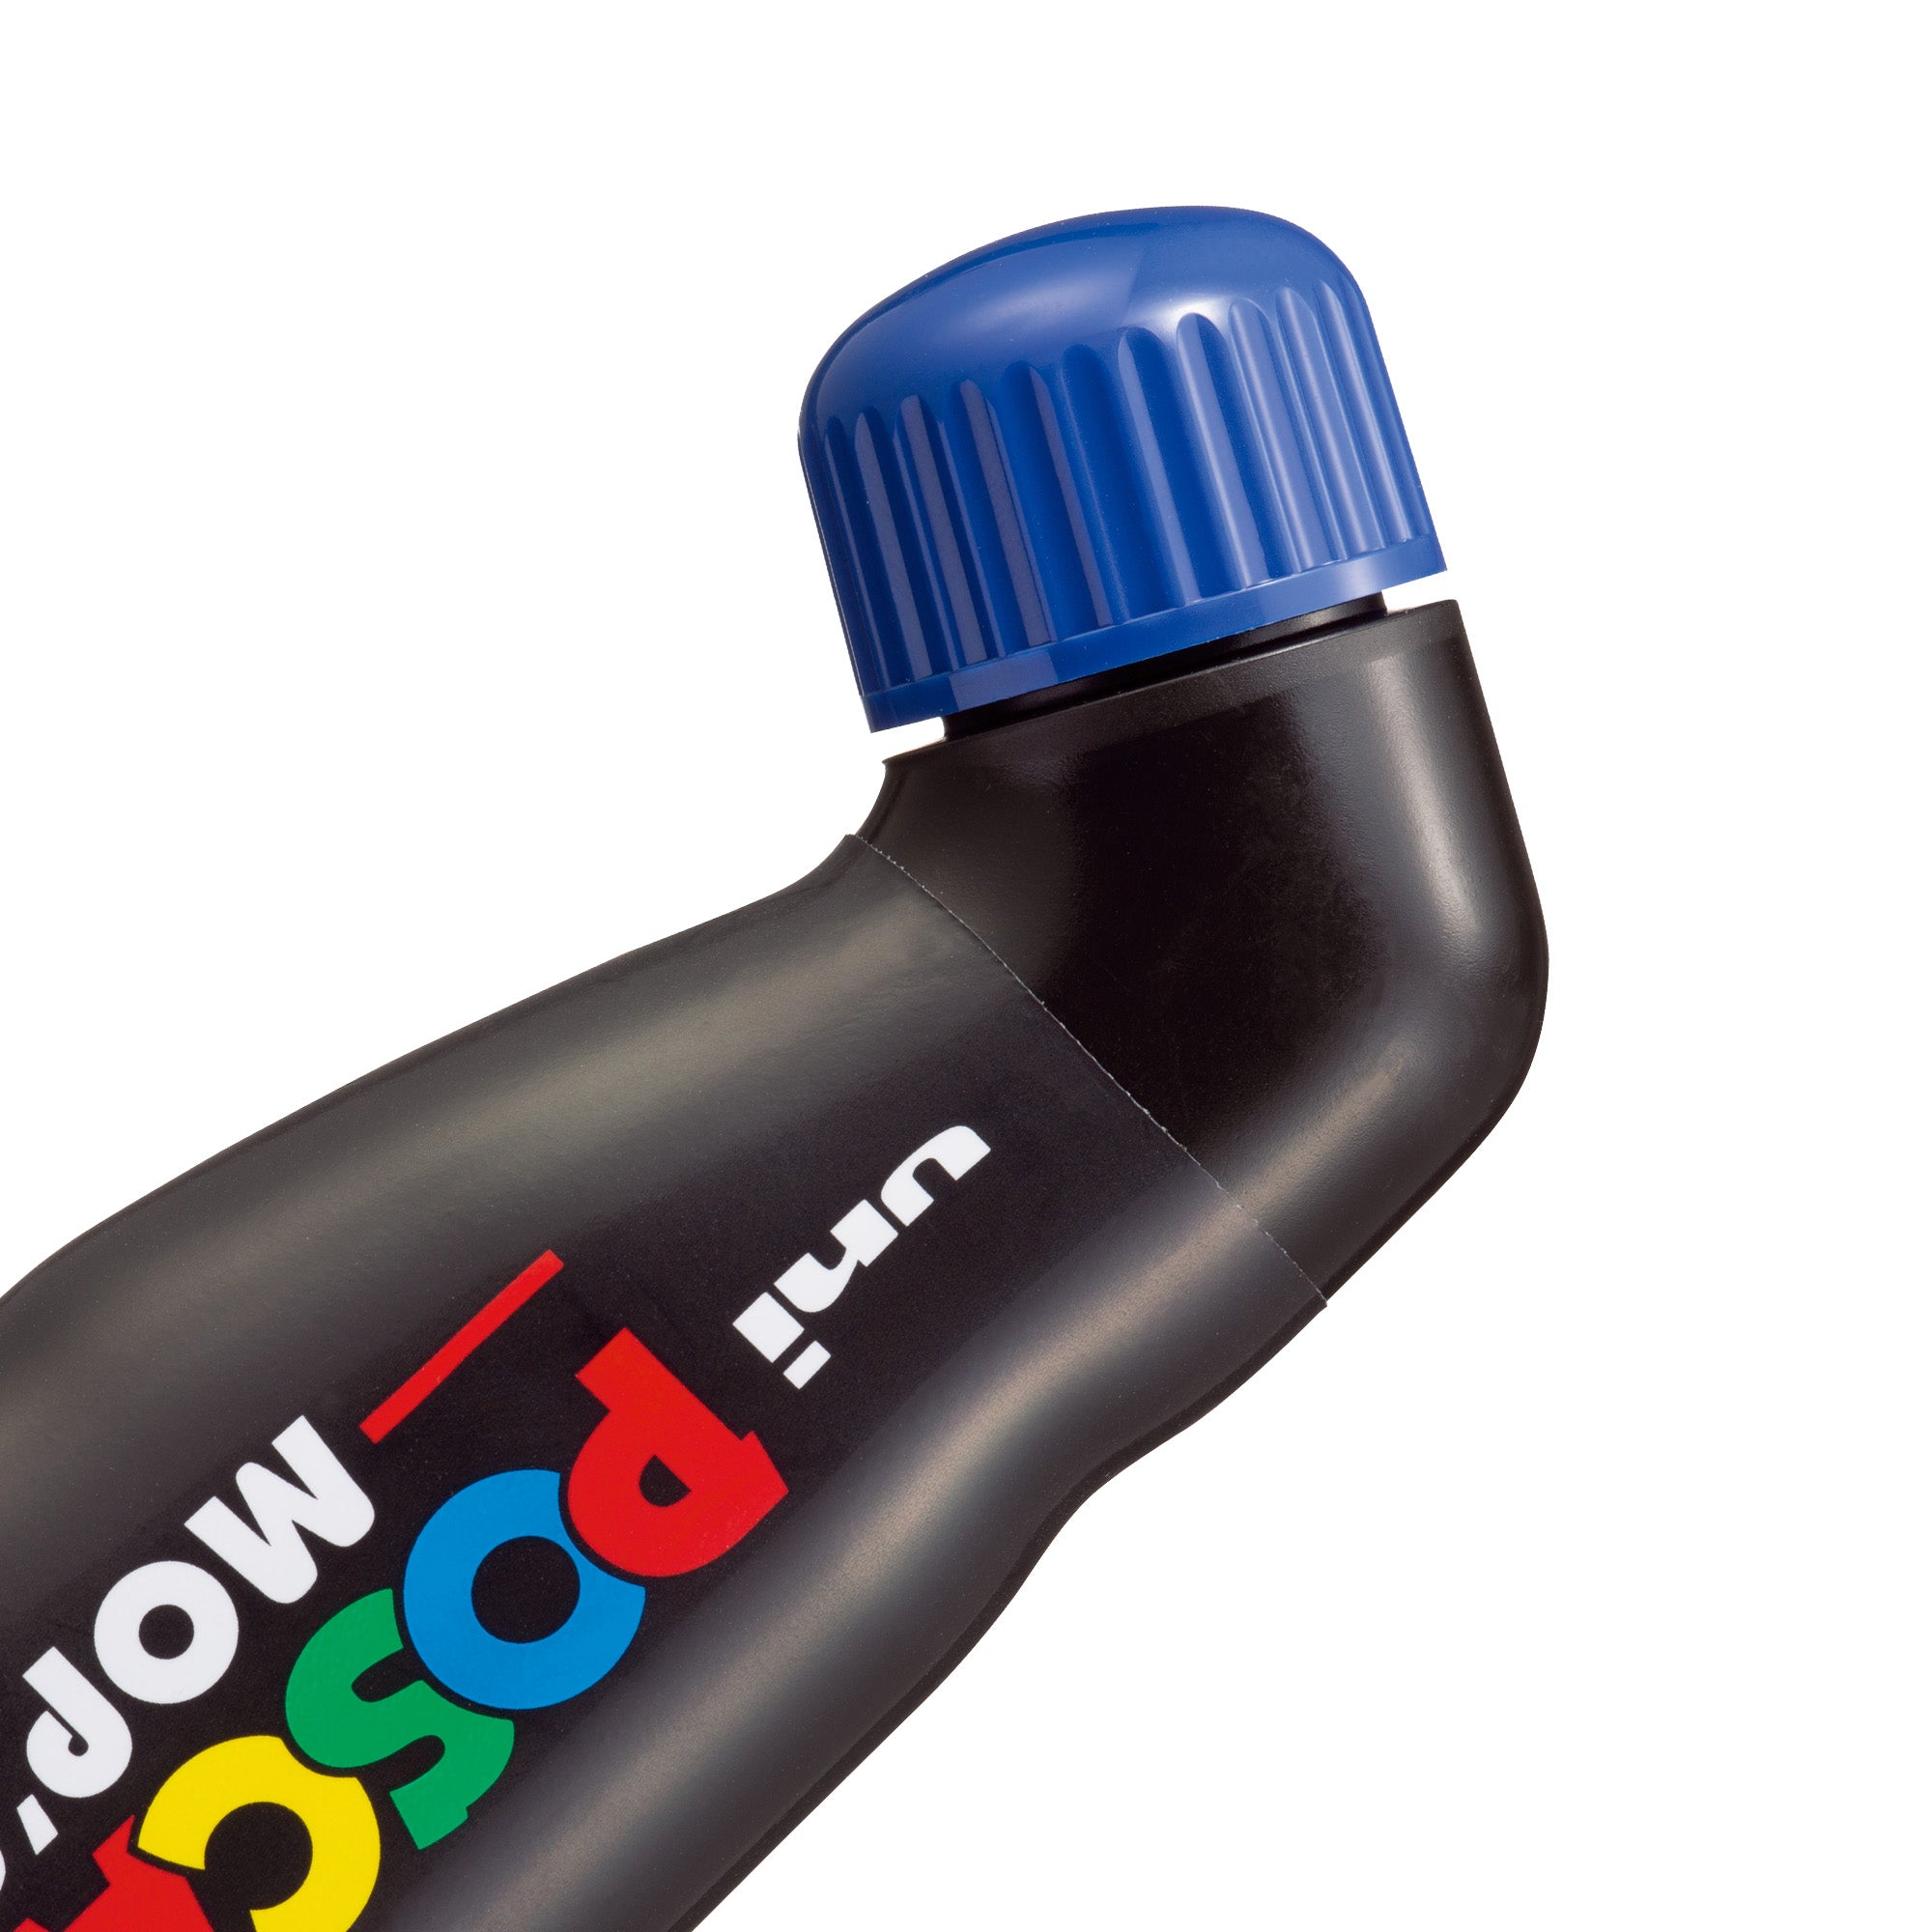 uni® POSCA® MOP'R PCM-22 Water-Based Paint Markers (8 Pack)